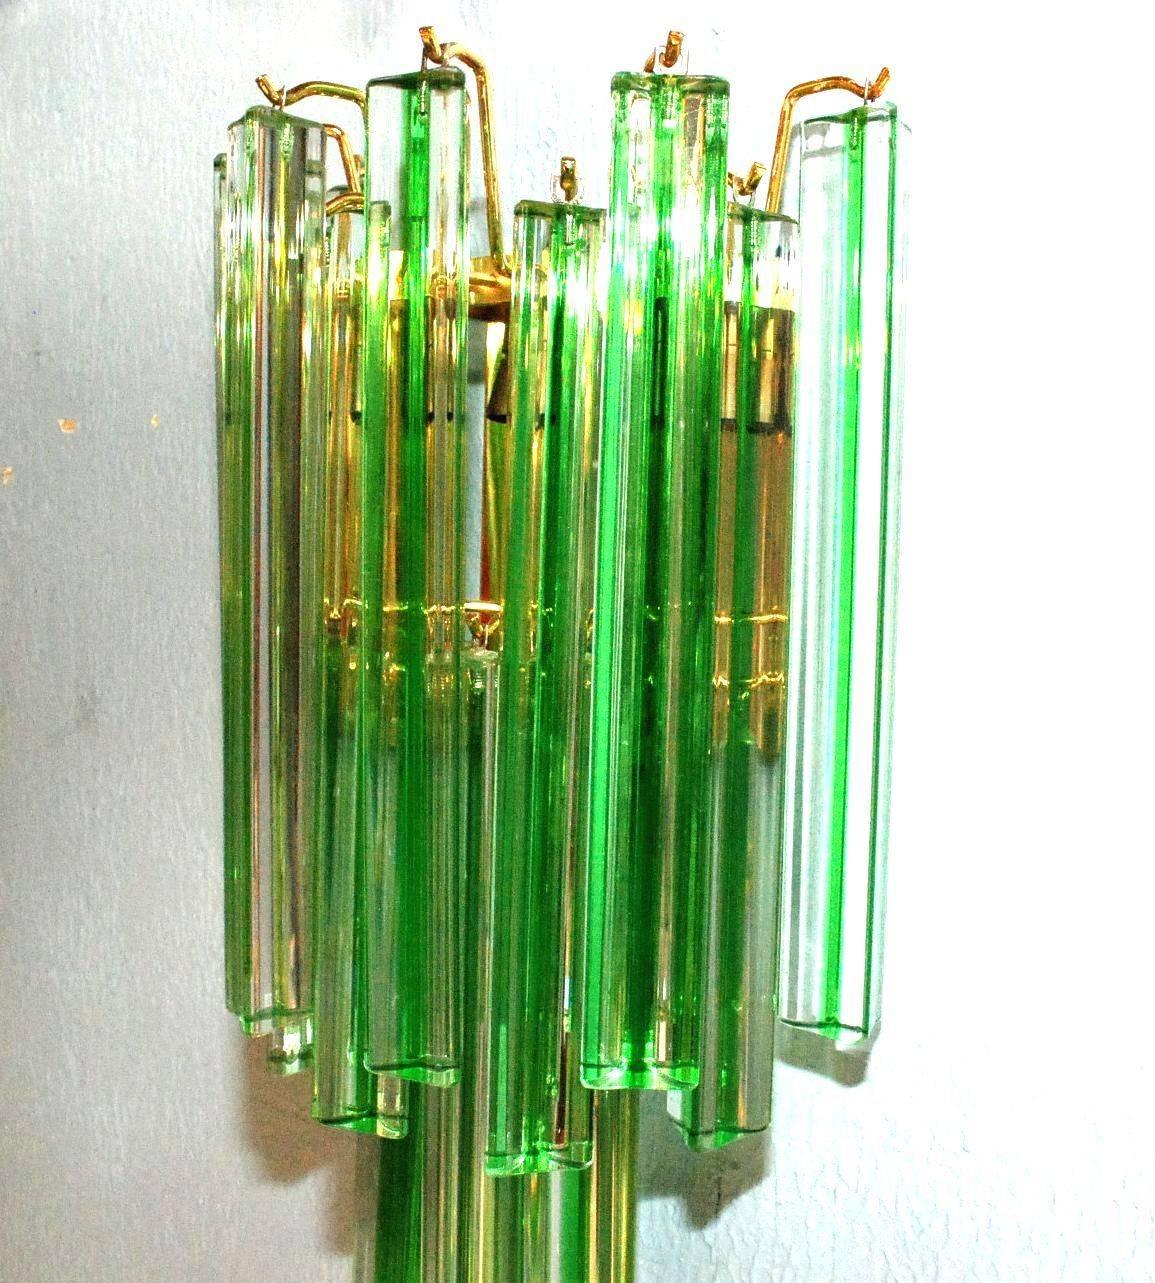 Set of four Italian sconces with Murano glass Triedri crystals with green stripes on brass frame.
Two candelabra light sockets each sconce, wired for the U.S.
Can be purchased individually, price listed is for one sconce.